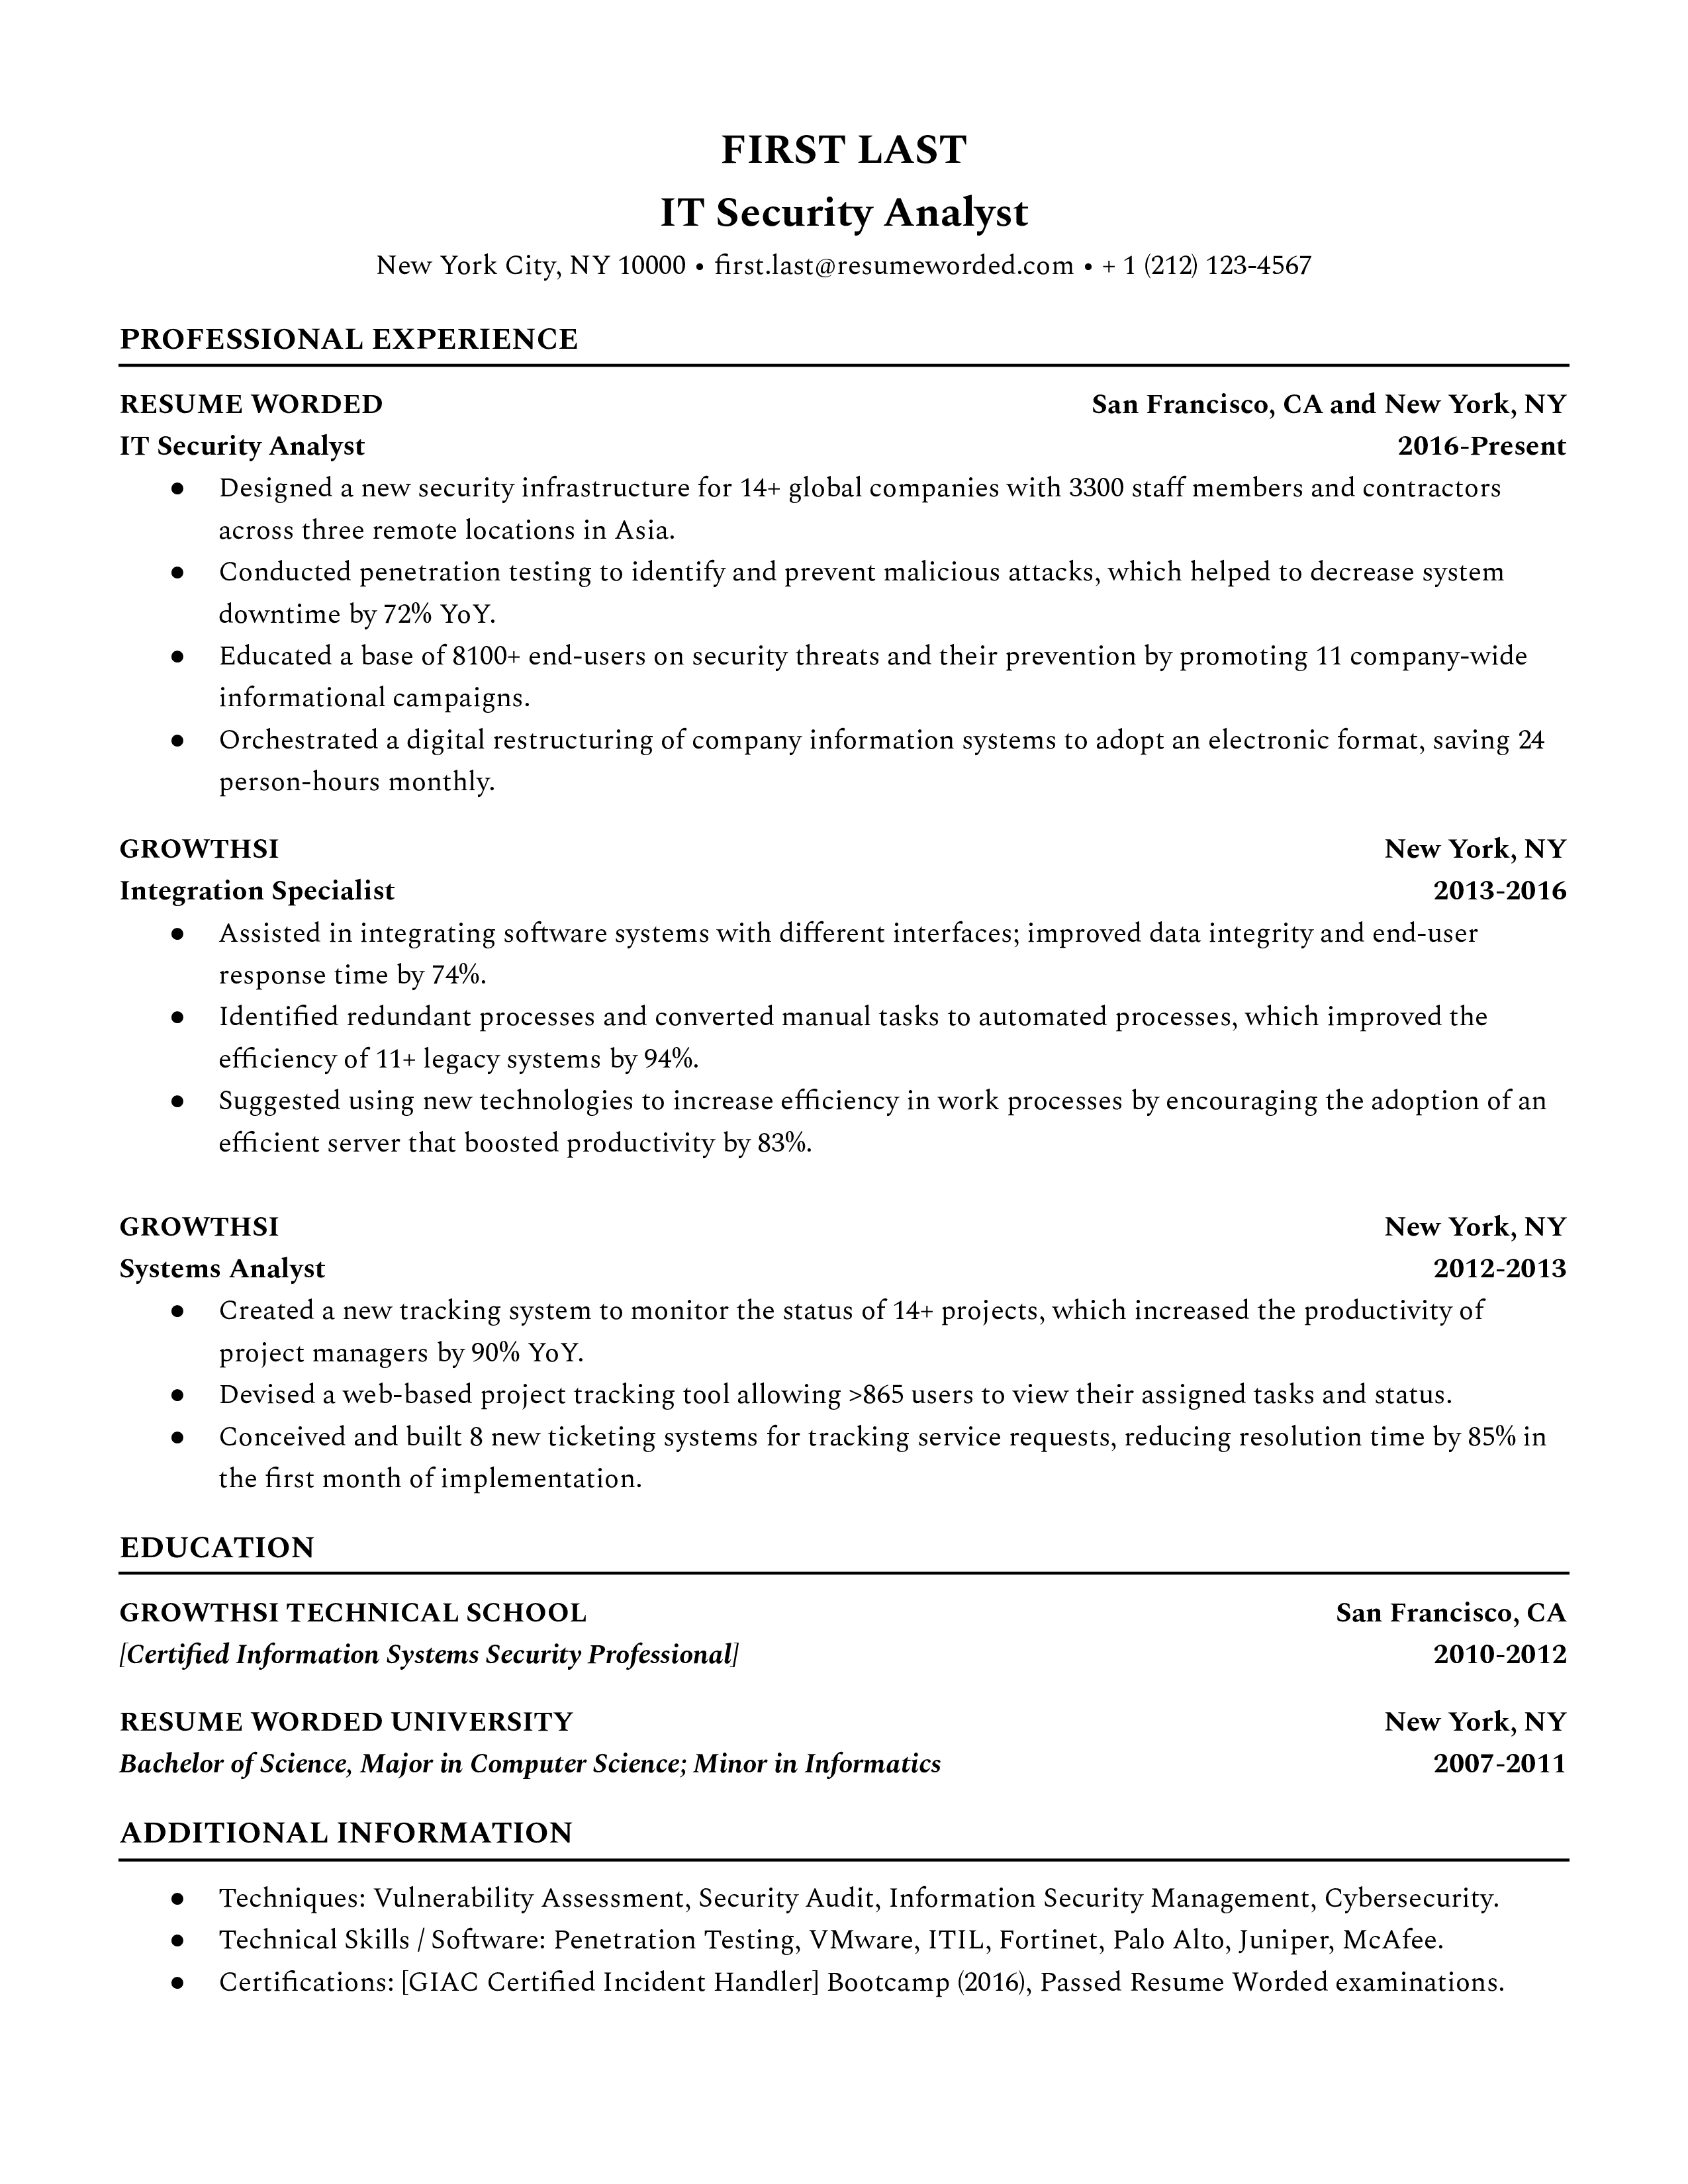 IT Security Analyst Resume Sample